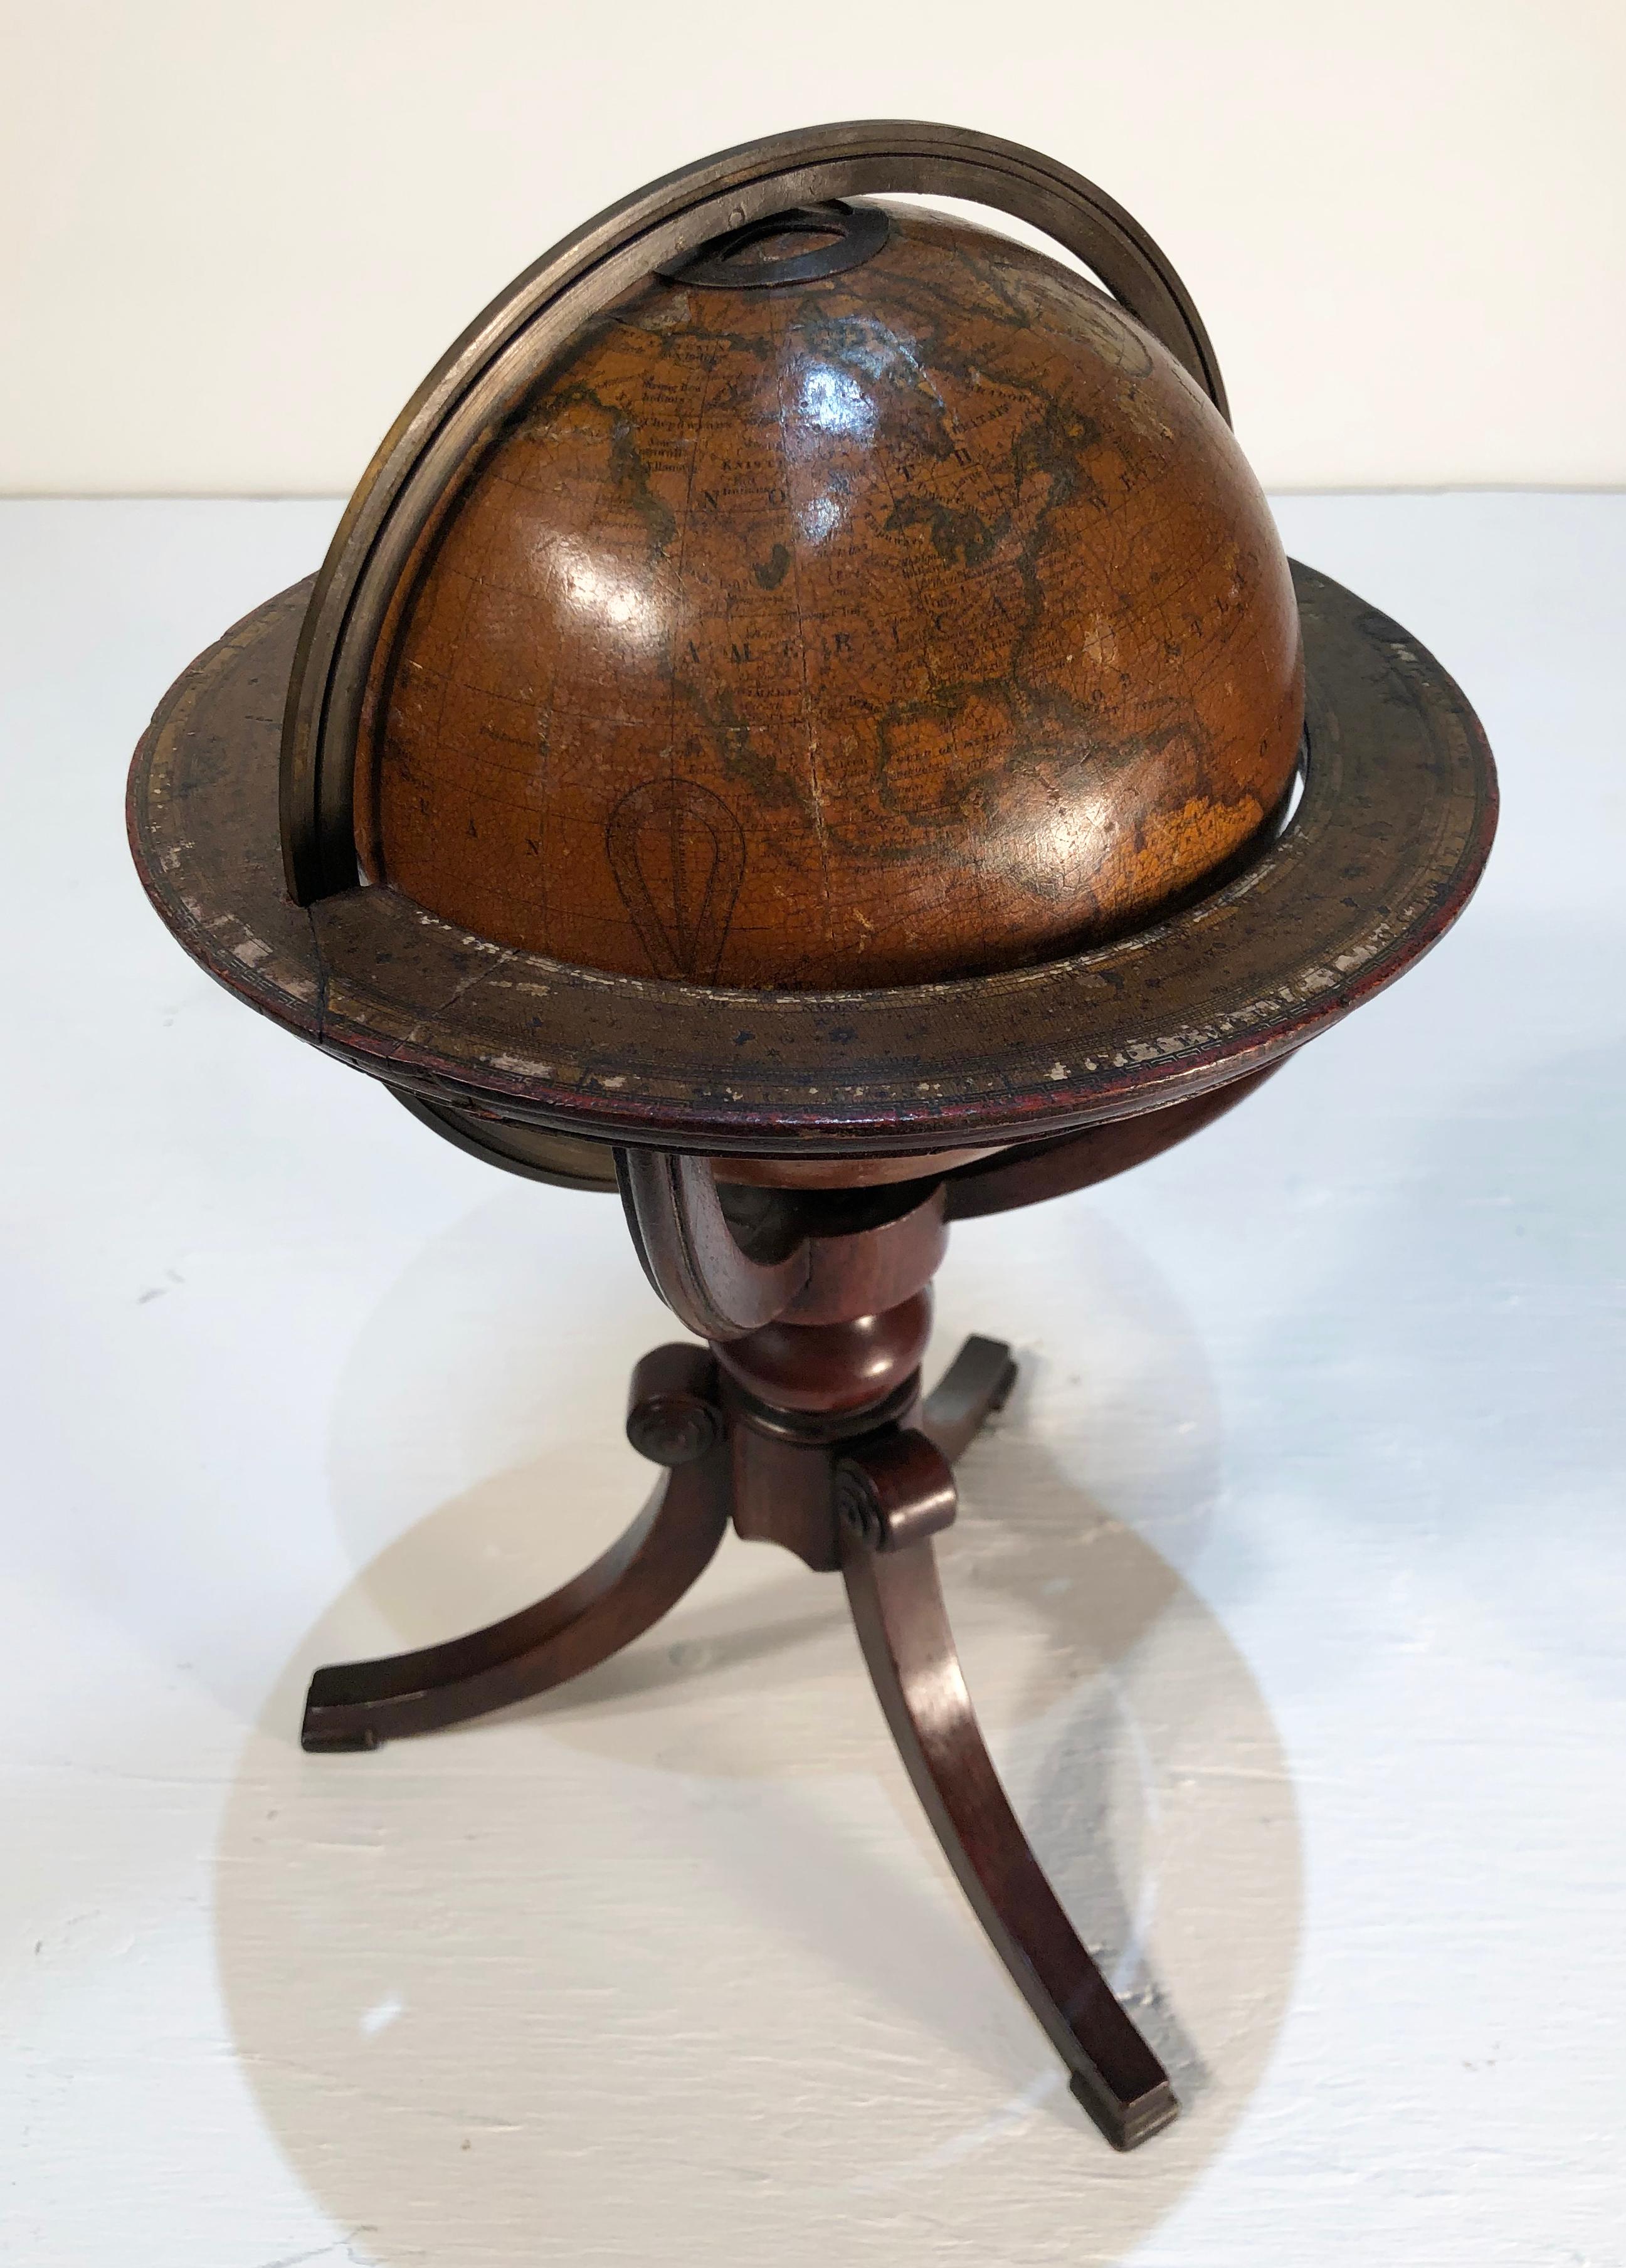 English Pair of Miniature 19th Century Globes, Terrestrial and Celestial